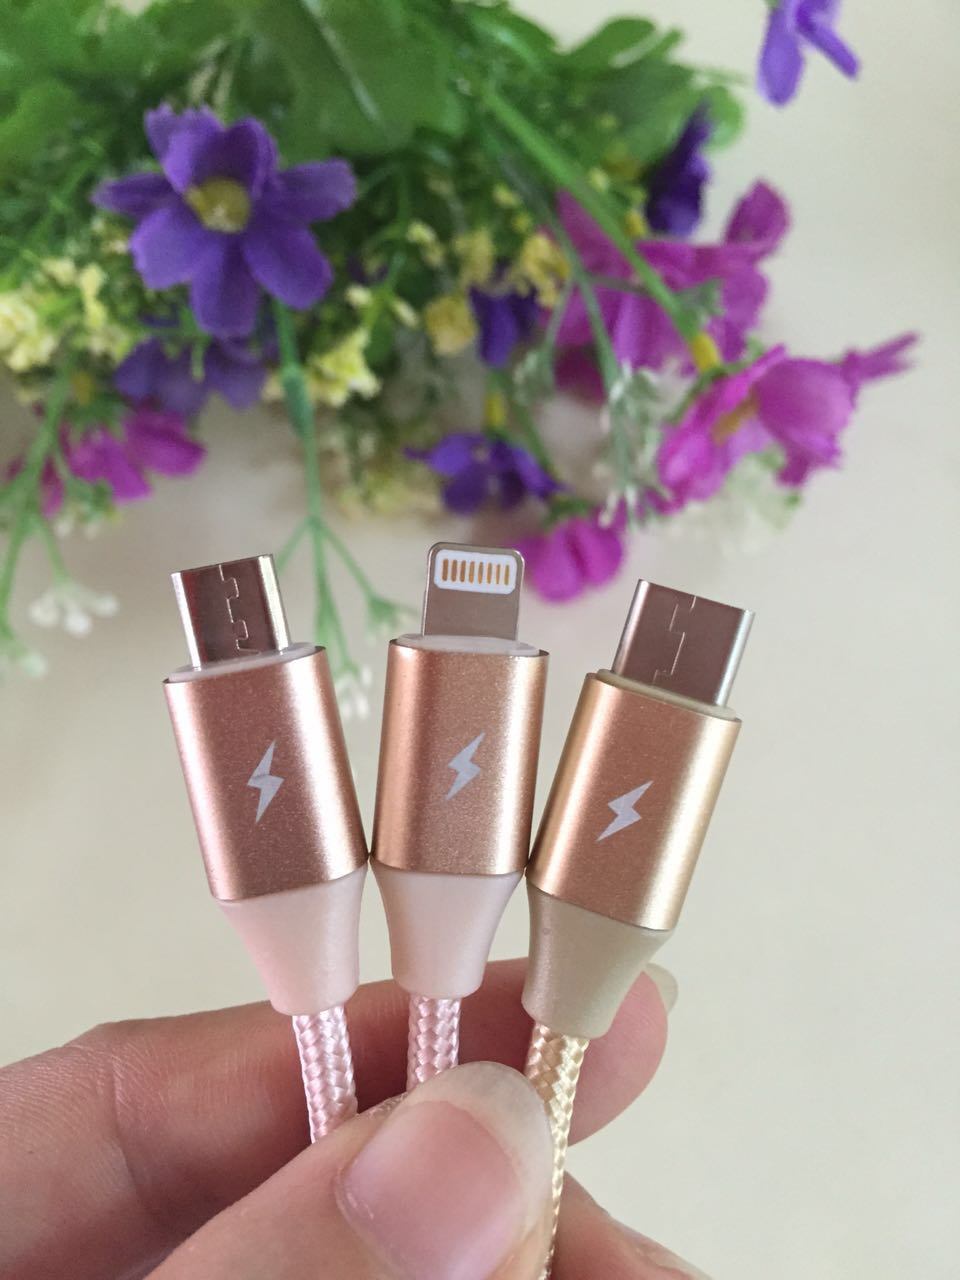 Bl637 Three-in-One Universal Fashion Mobile Phone USB Data Cable